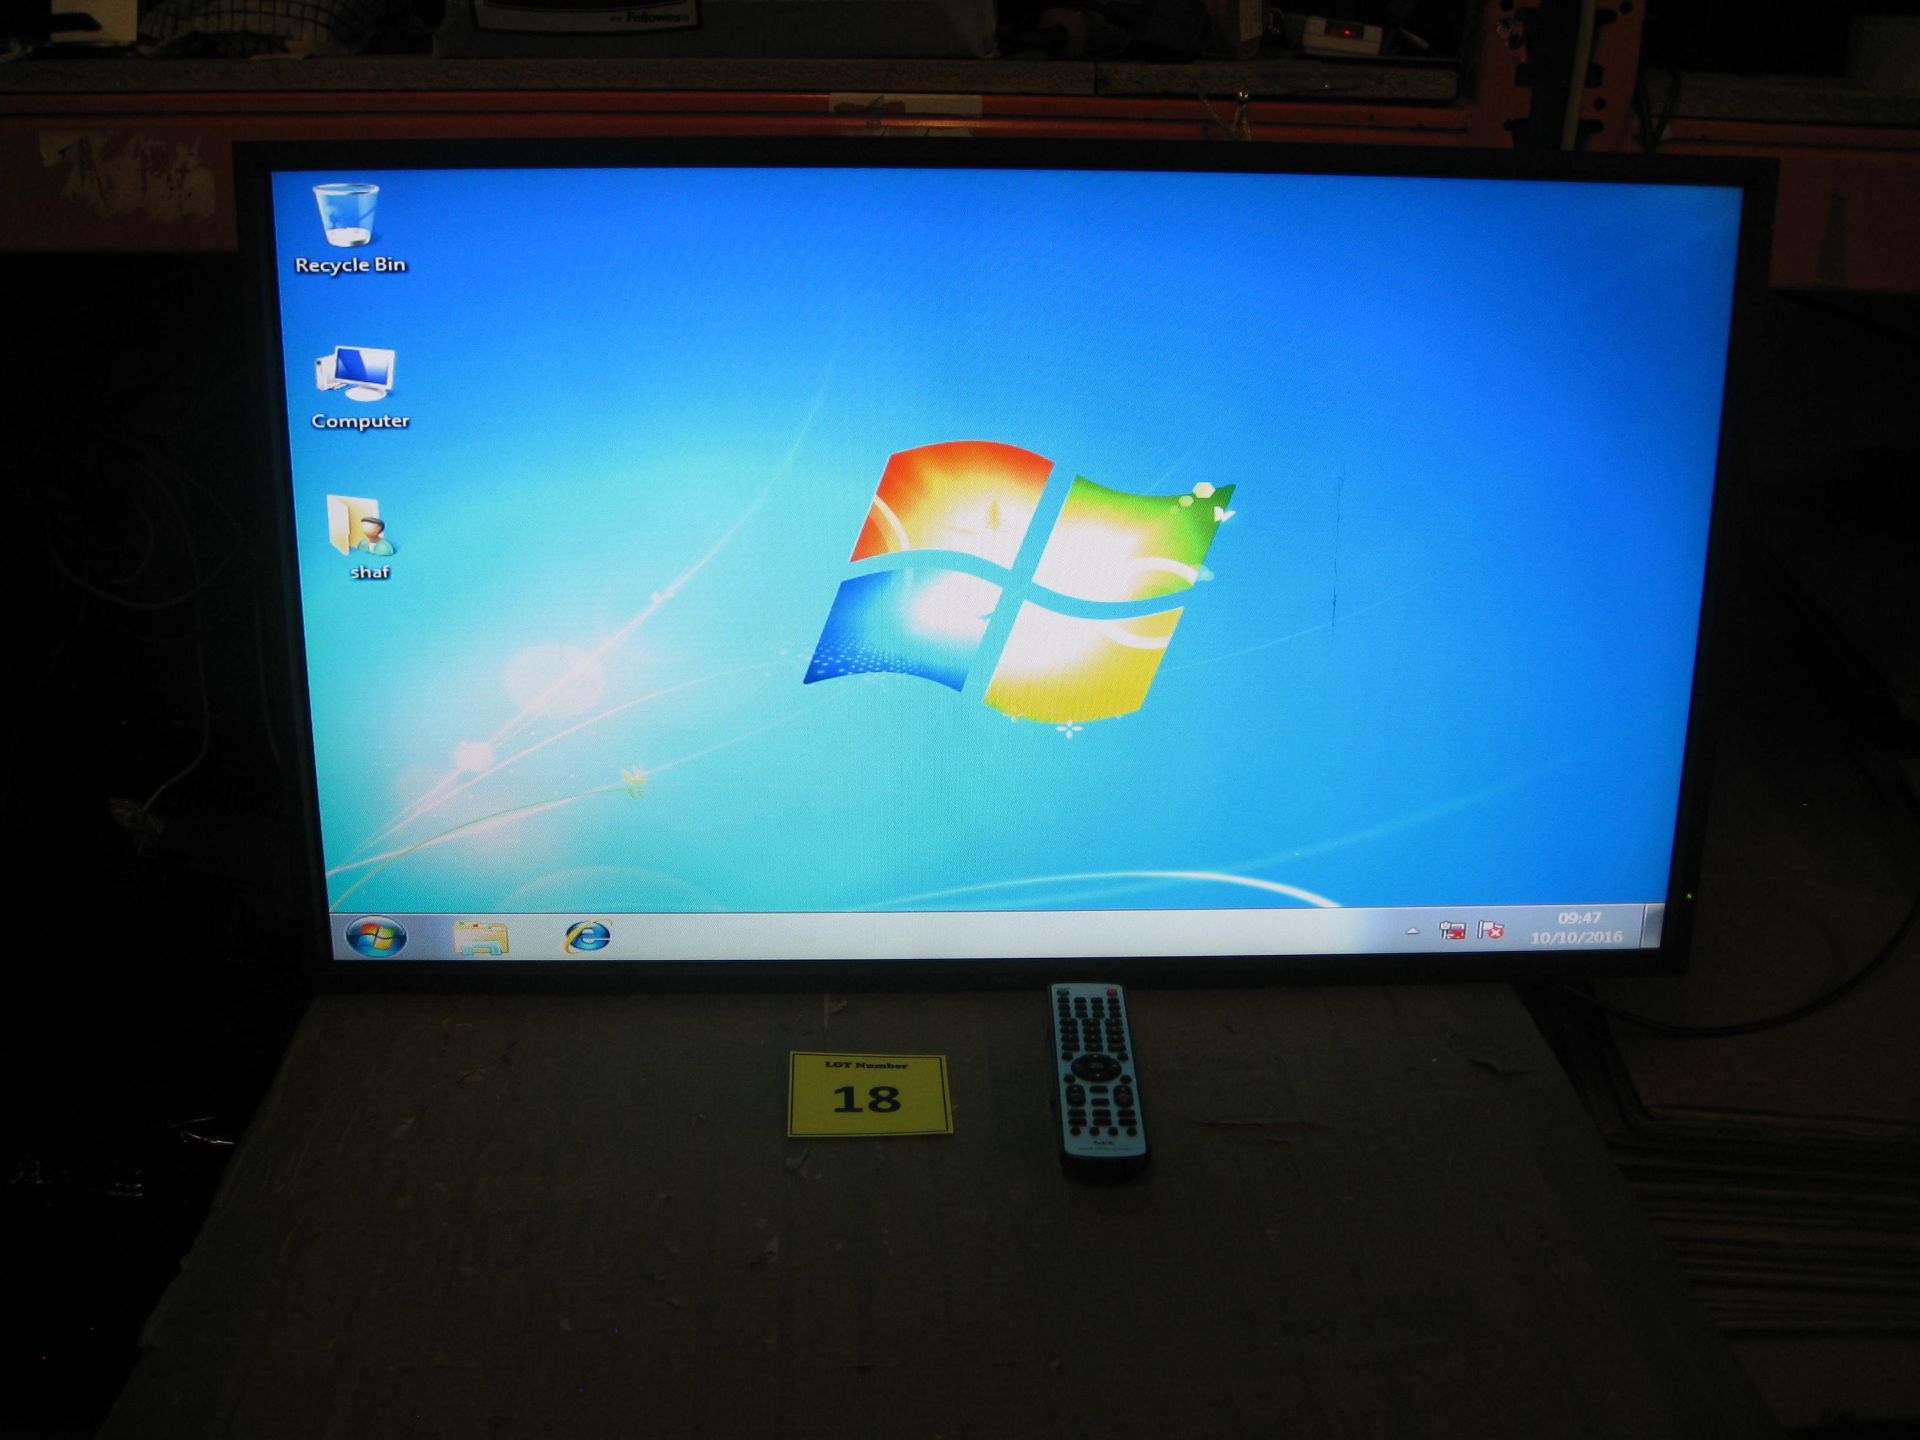 NEC 40" LCD MONITOR WITH HDMI. MODEL LCD4020-BK-AV. WITH REMOTE CONTROL (SCRATCH ON SCREEN)